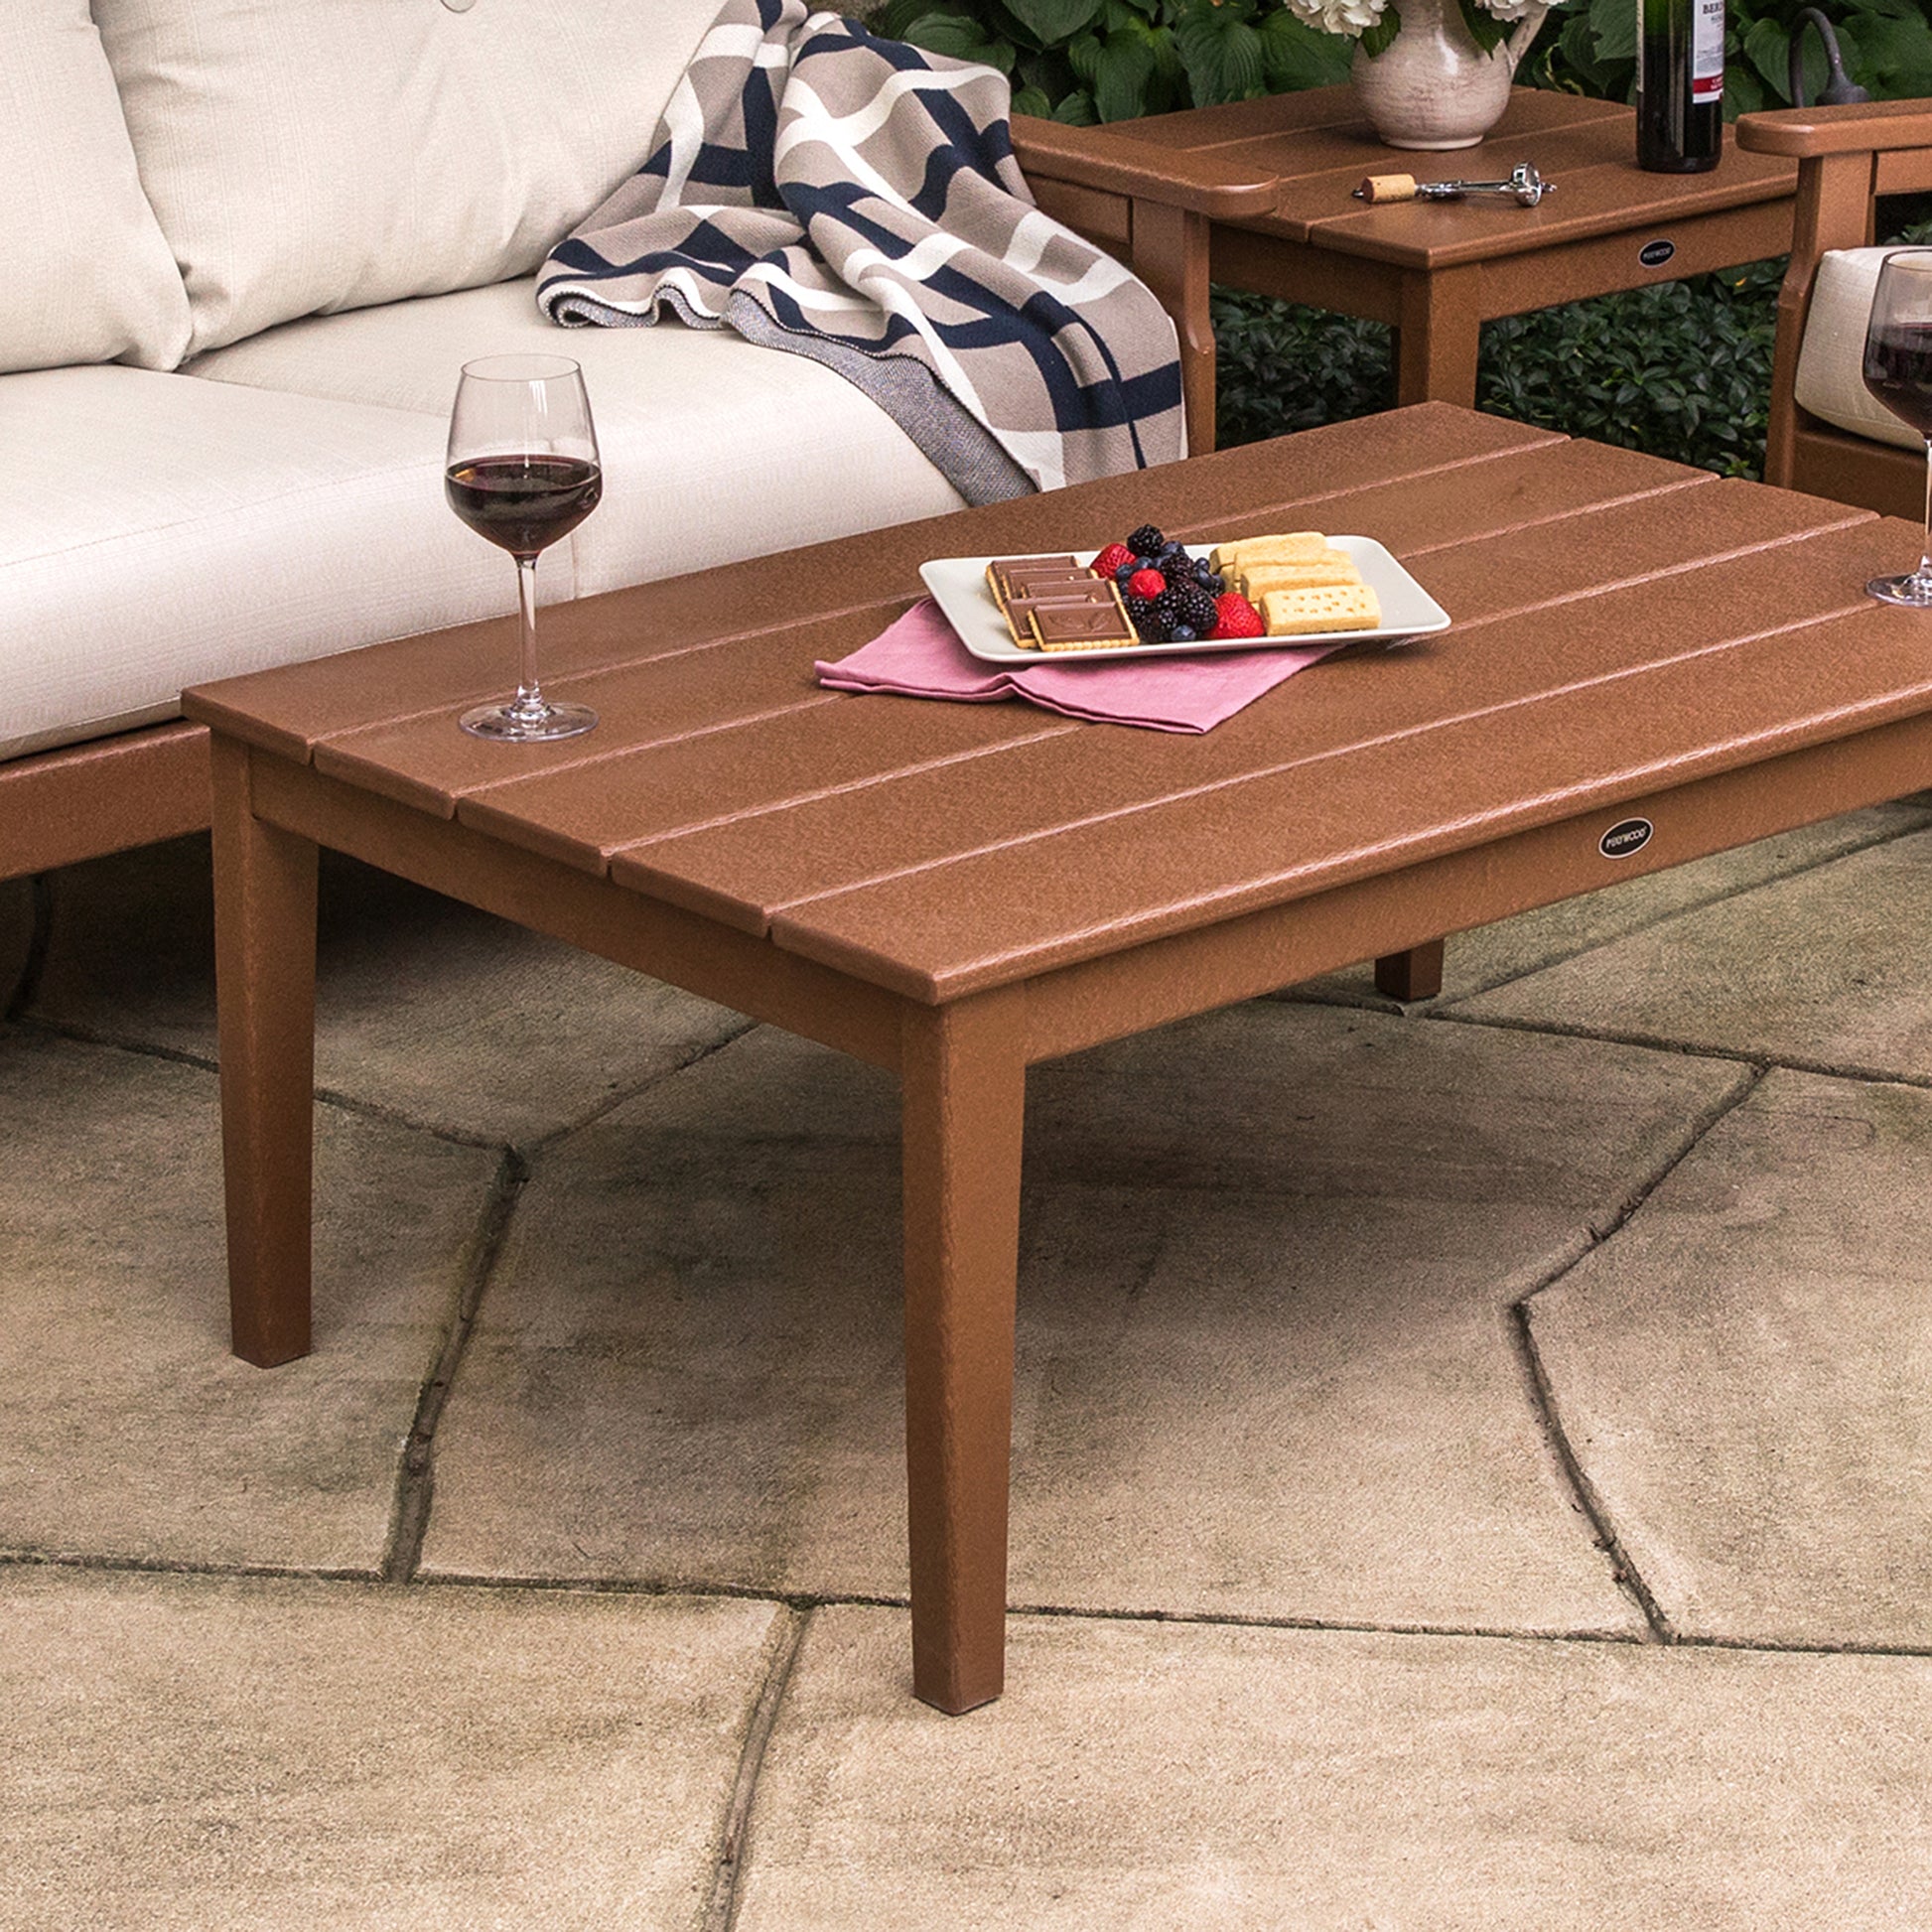 A cozy outdoor setting featuring the POLYWOOD Newport 28" x 42" Coffee Table made from POLYWOOD recycled plastic lumber, holding a glass of red wine, a plate of cookies topped with berries, and a book, between two.